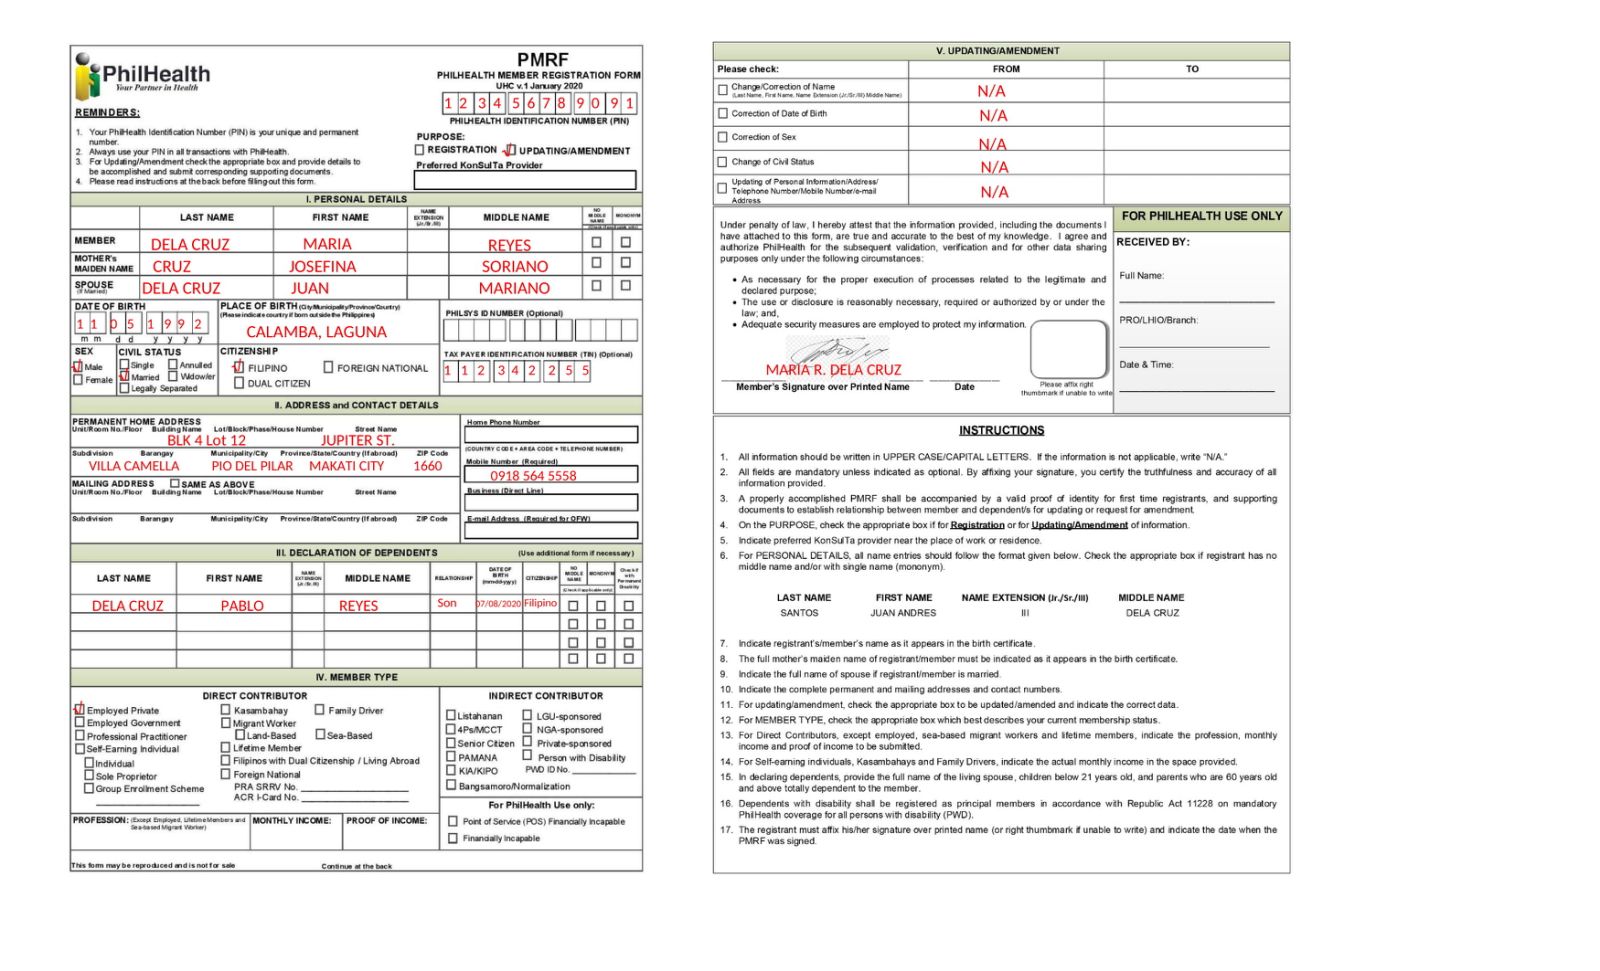 PhilHealth Pmrf Form Sample With Answers